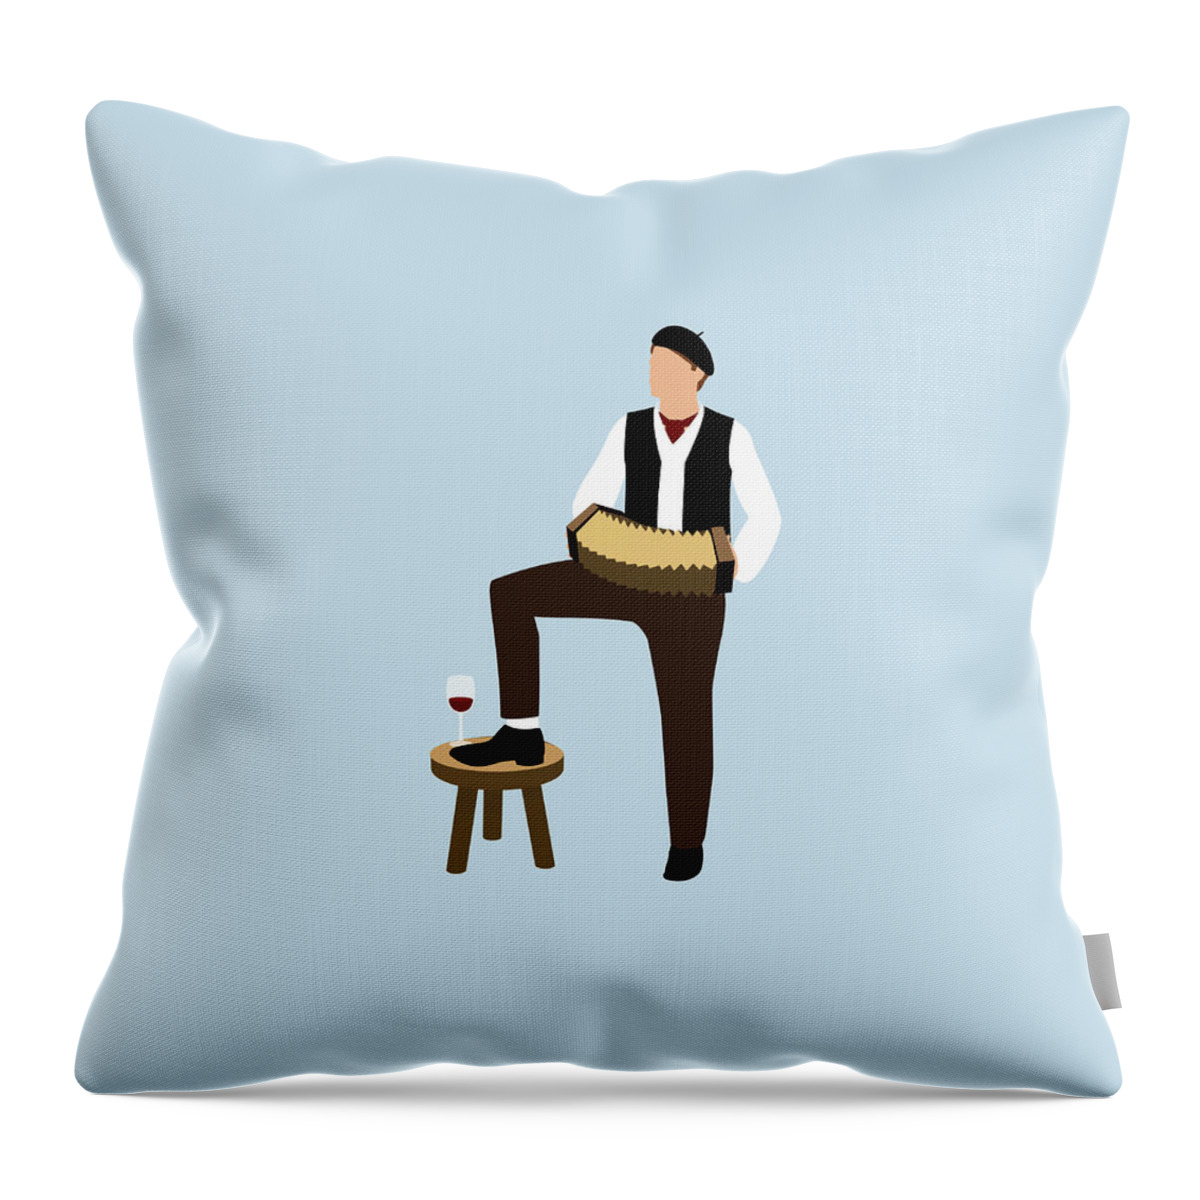 People Throw Pillow featuring the digital art Stereotypical French Man by Ralf Hiemisch